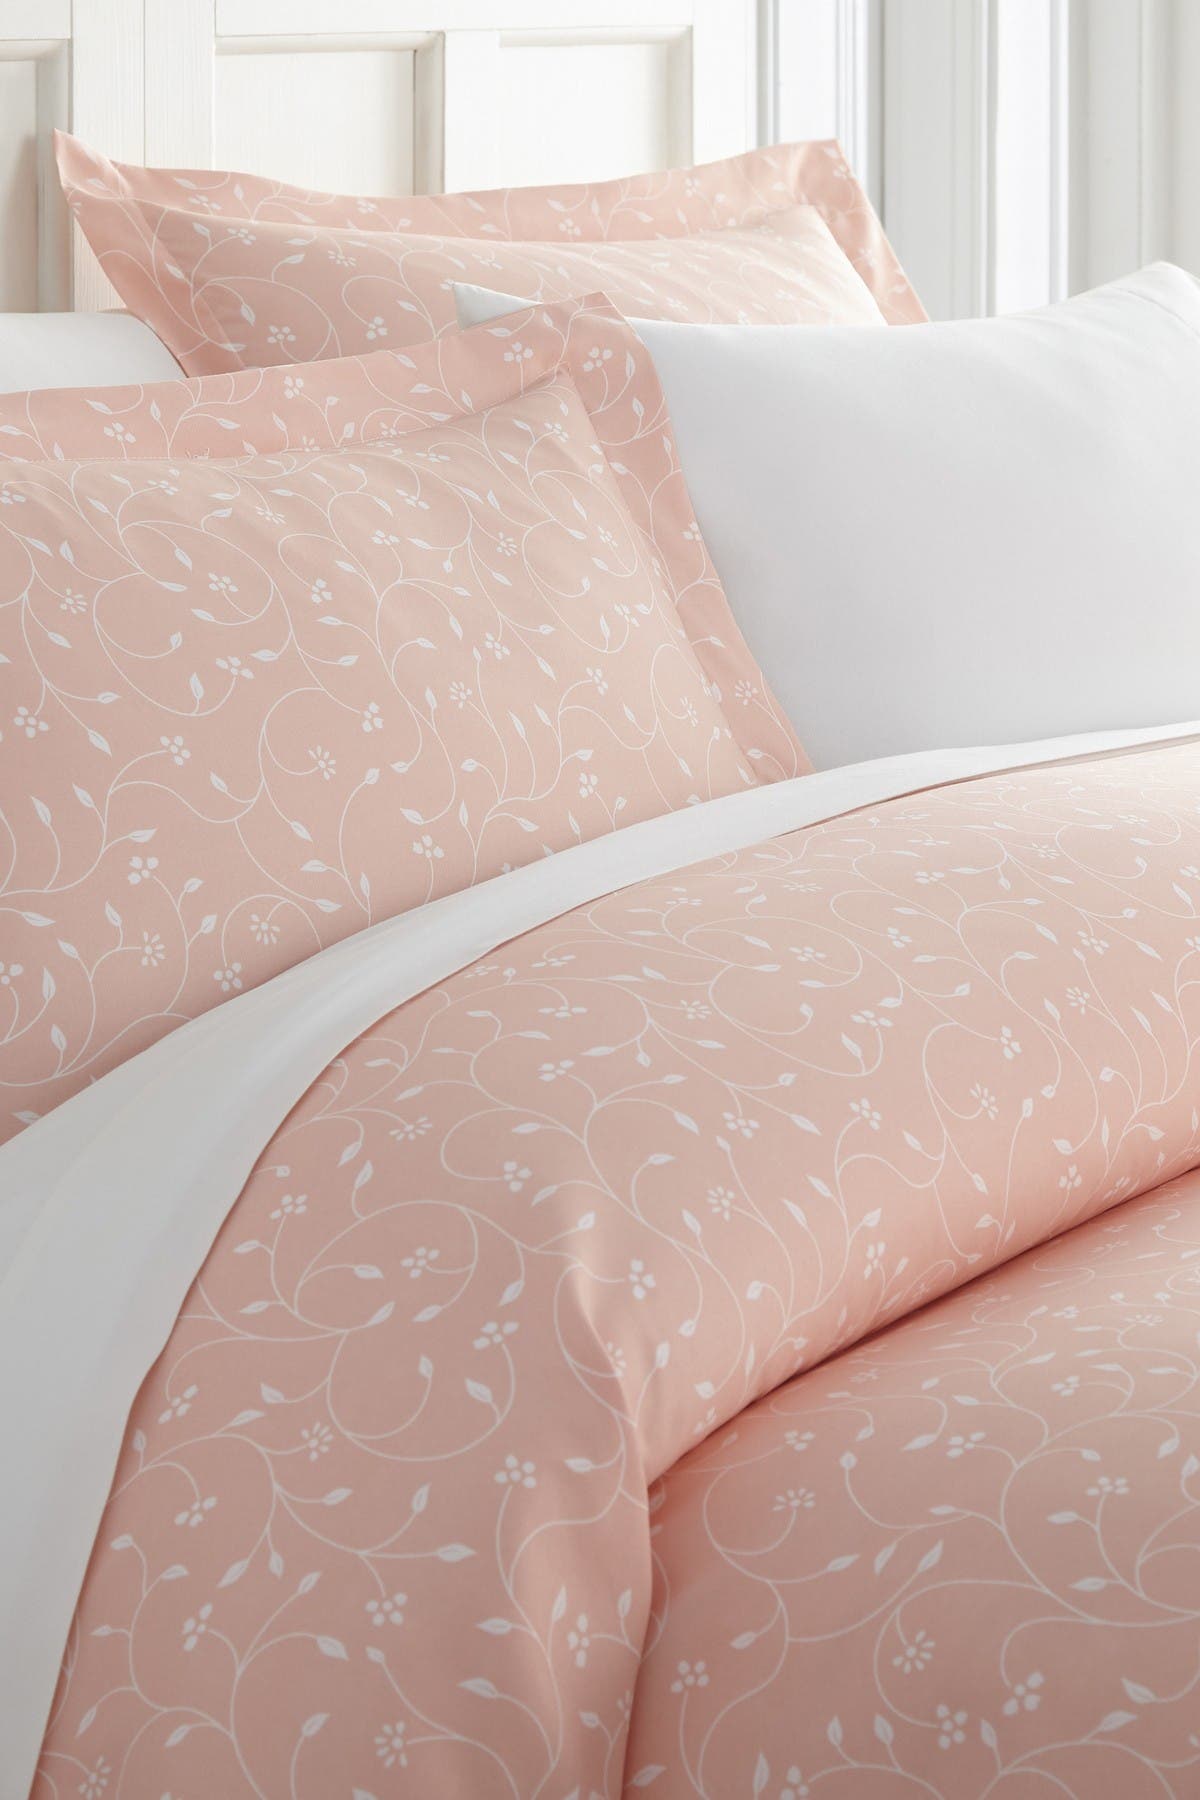 Ienjoy Home Enhance And Improve Your Bedroom 3-piece Duvet Cover Set In Pink